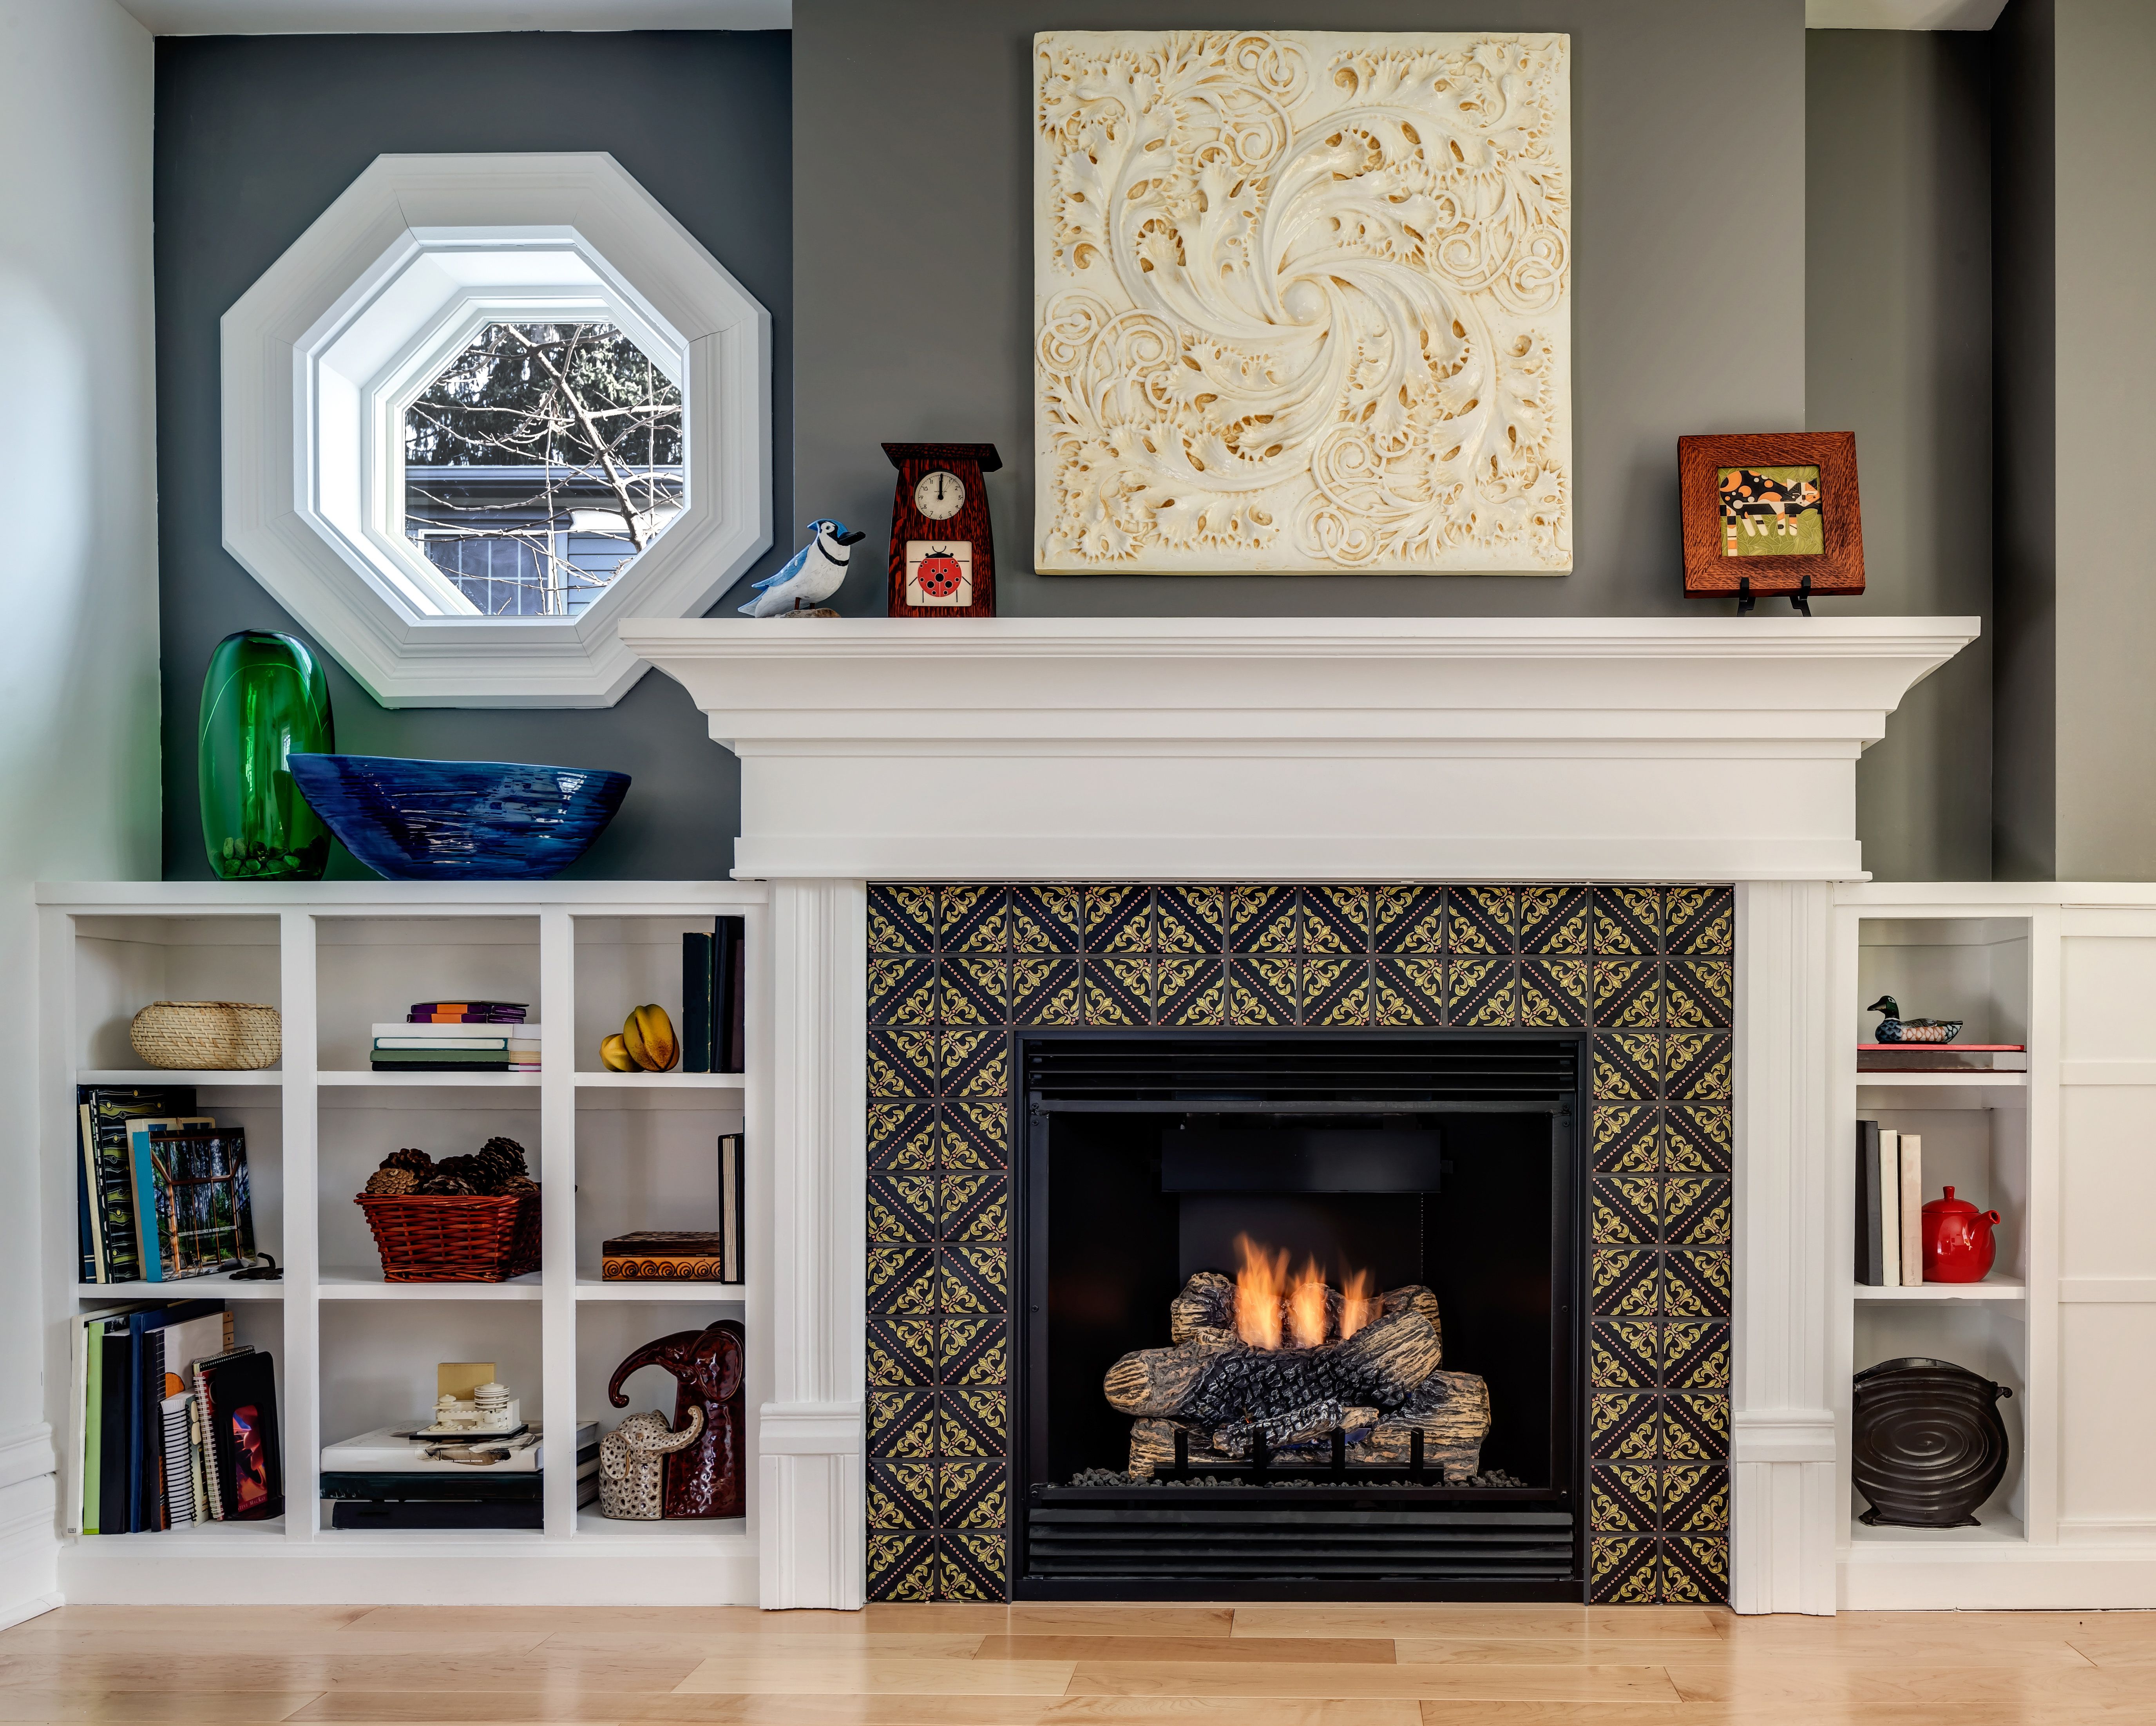 Field Stone Fireplace Elegant This Small but Stylish Fireplace Features Our Lisbon Tile